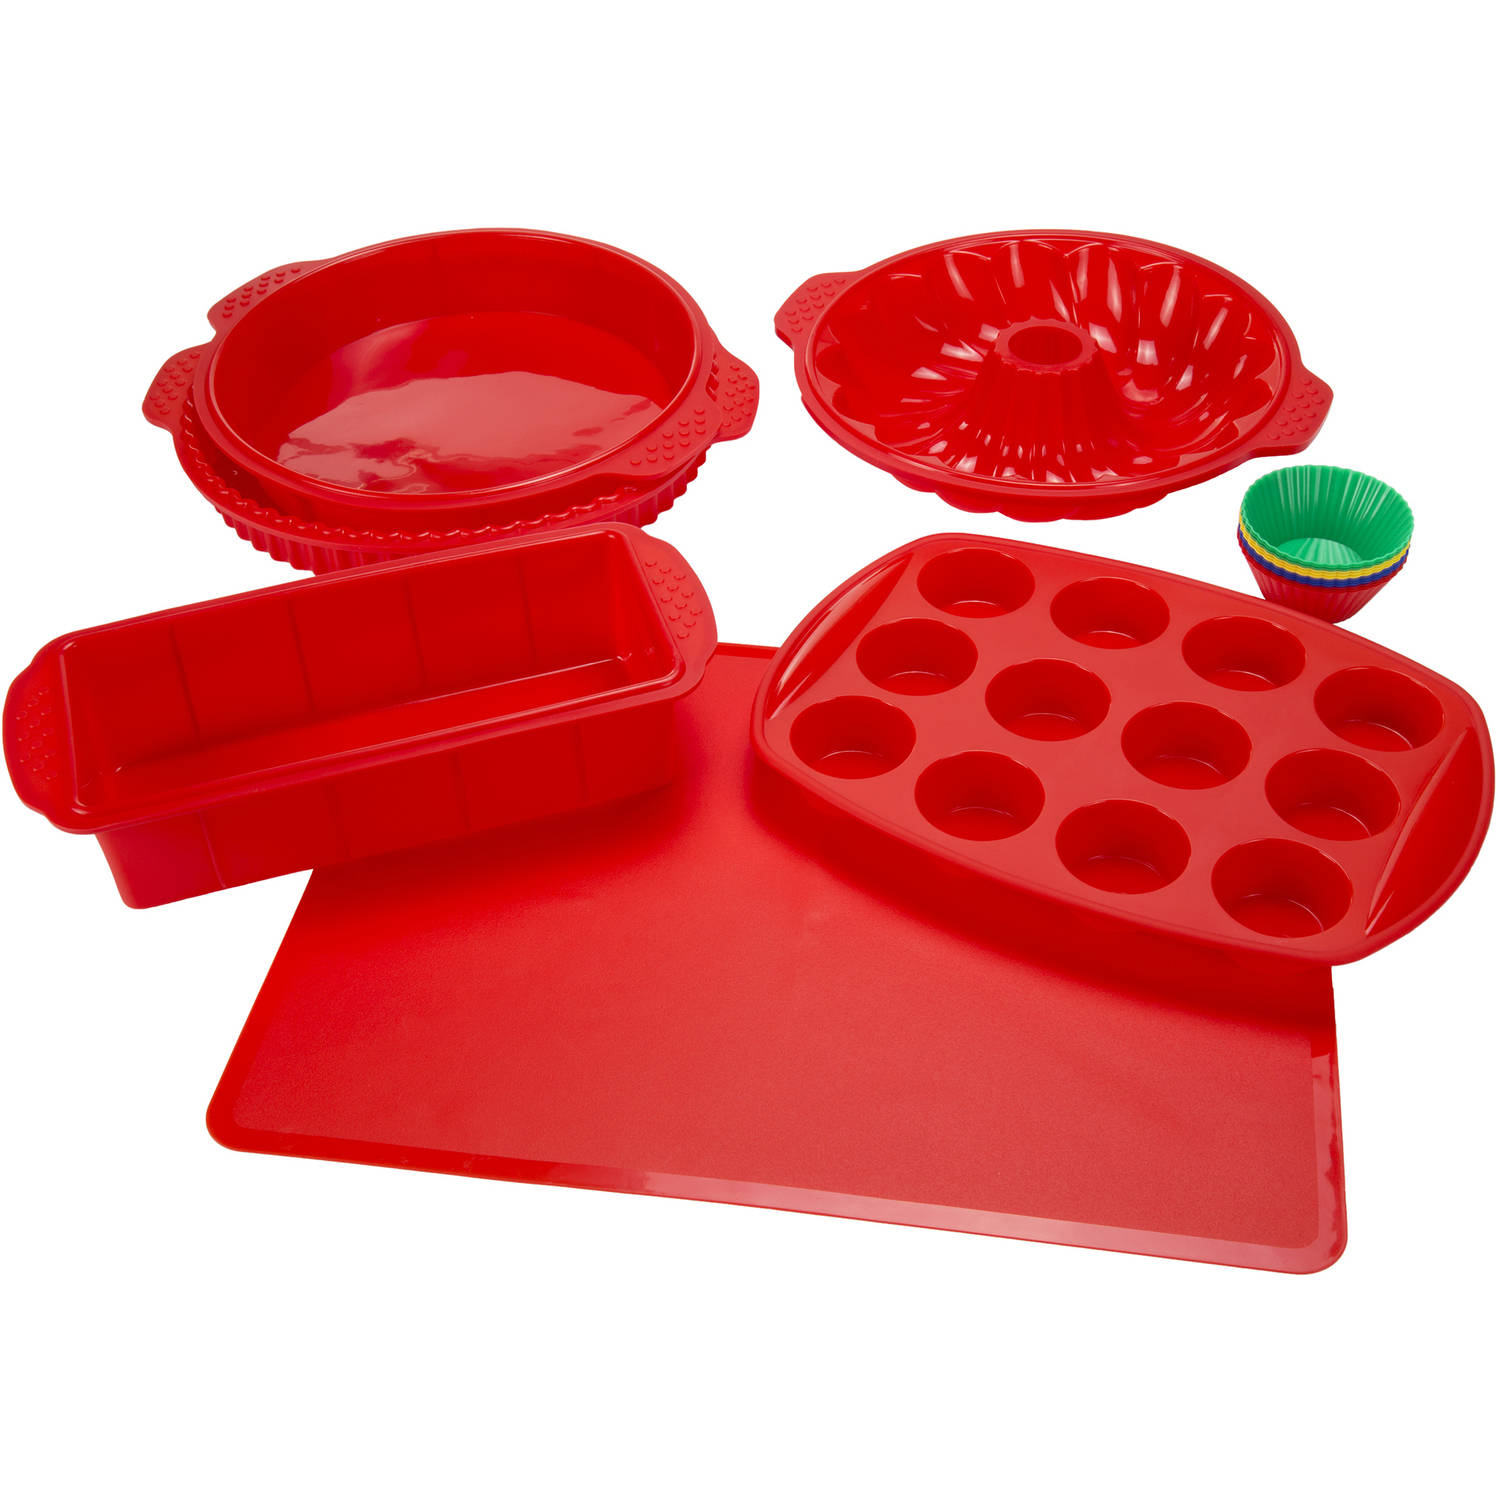 Walmart: Classic Cuisine 18 Piece Silicone Bakeware Set Only $16.97!